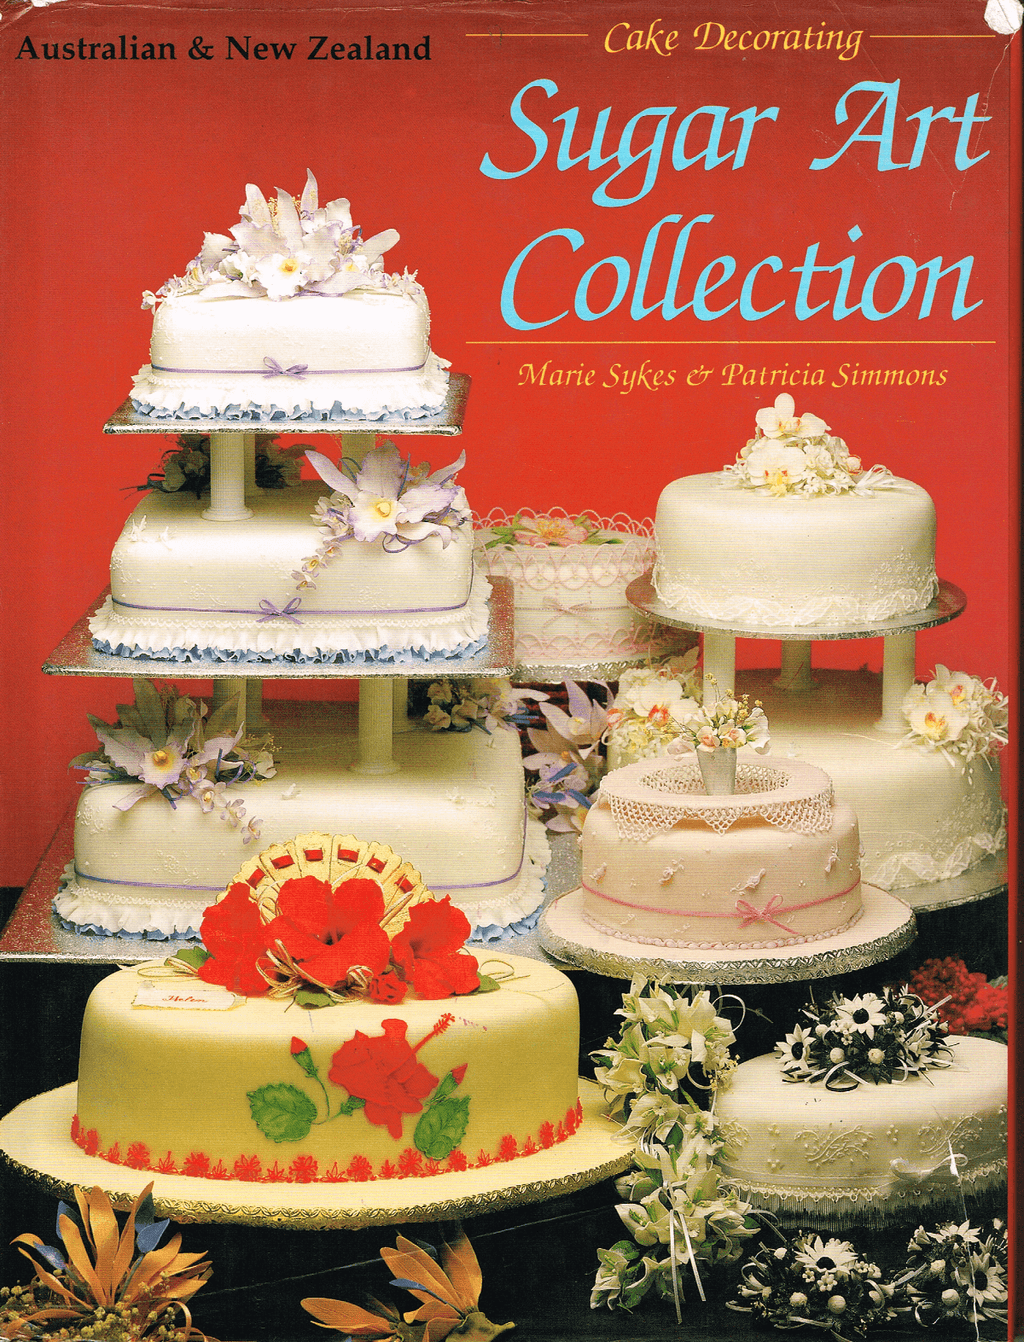 BIG LOT OF VINTAGE HARDCOVER CAKE DECORATING BOOKS. VERY DETAILED AND HAS  FULL INSTRUCTION FOR CAKE DESIGNS AND DECORATING. CONDITION IS EXCELLENT.  READY TO USE. ALL SHOWN INCLUDED Auction | MaxSold